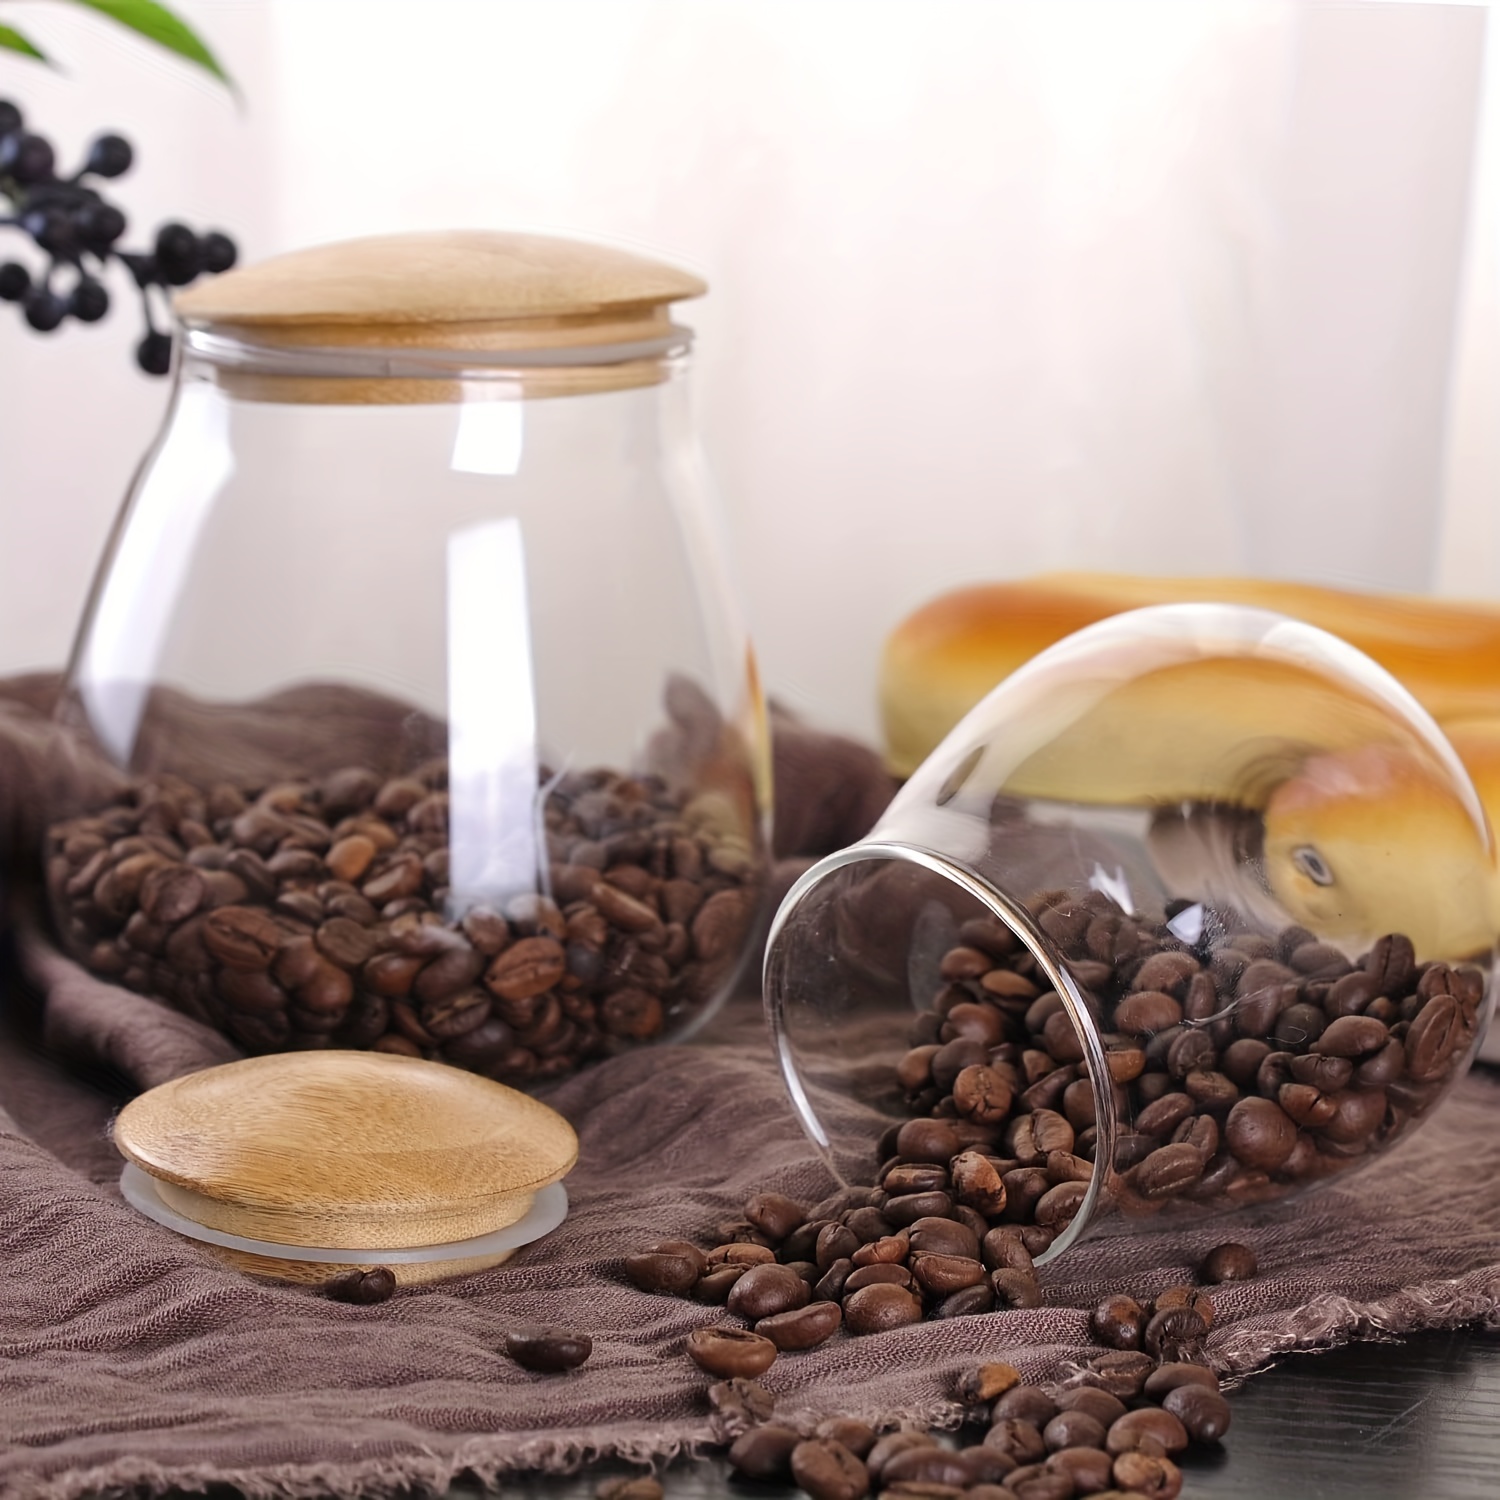 800Ml/28Oz Clear Cute Glass Storage Jar Holder With Airtight Bamboo Lid,  Round Modern Decorative Small Container Jar For Coffee, Spices, Candy,  Salt